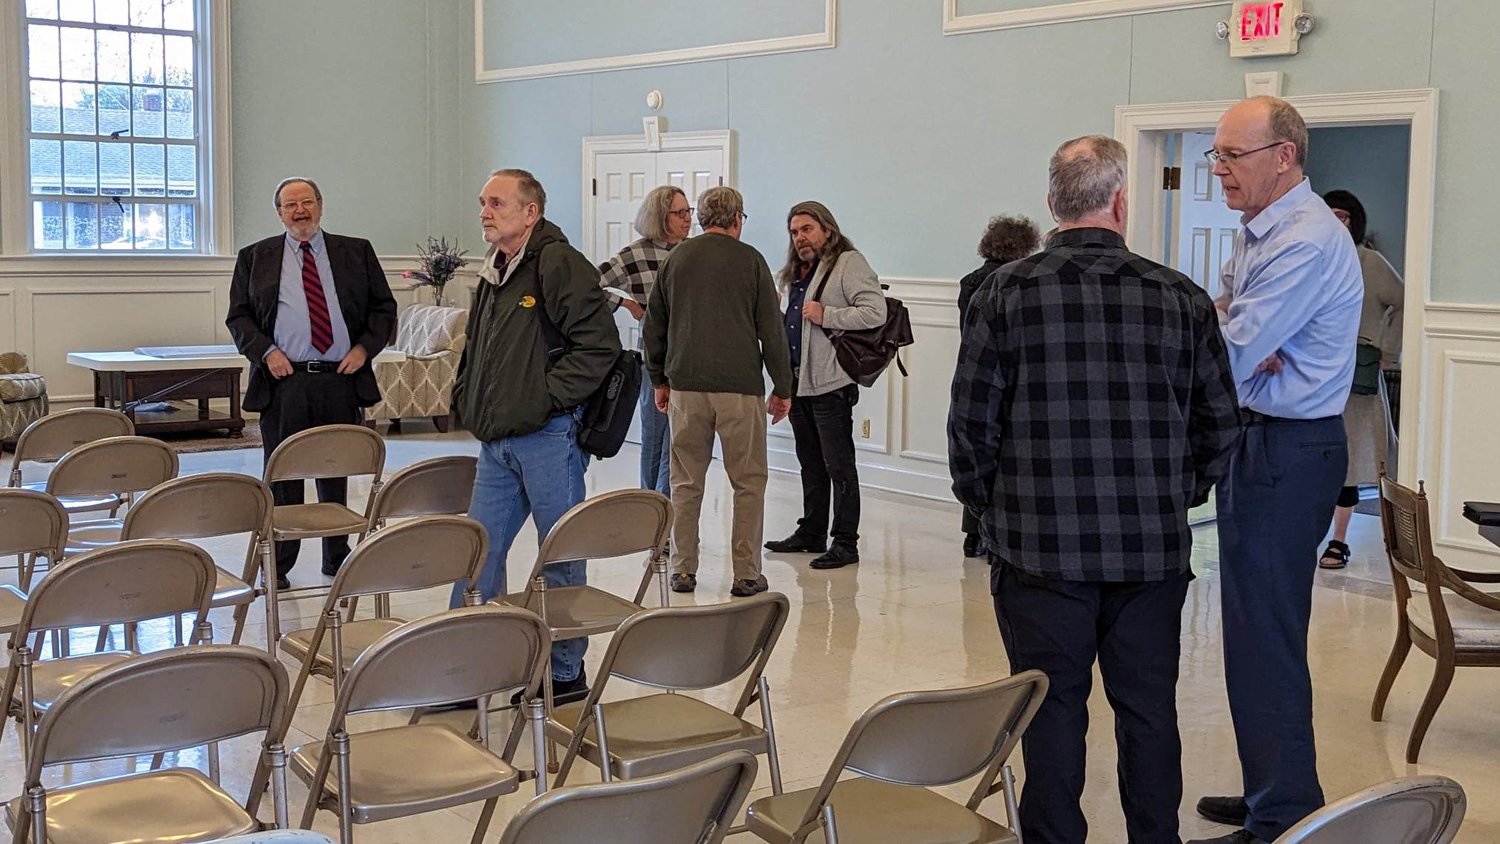 Springfield City Council’s longest-serving member, Craig Hosmer, far right, held a town hall meeting at National Avenue Christian Church last night to discuss development issues and accept questions. 